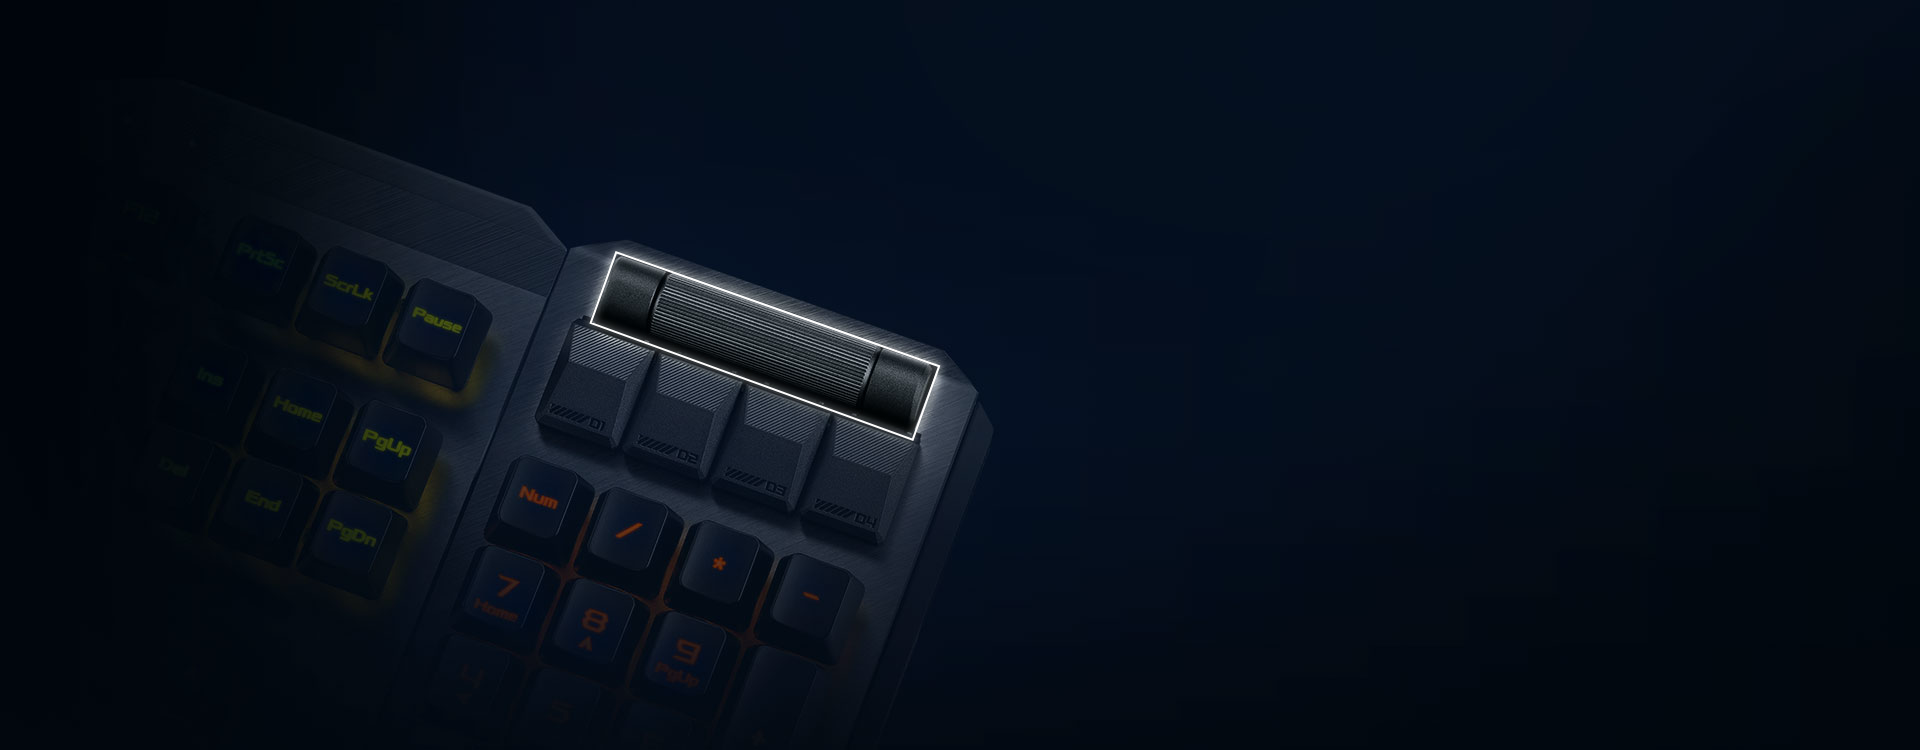 Close-up view of ROG Claymore II to show the volume control wheel on the numpad